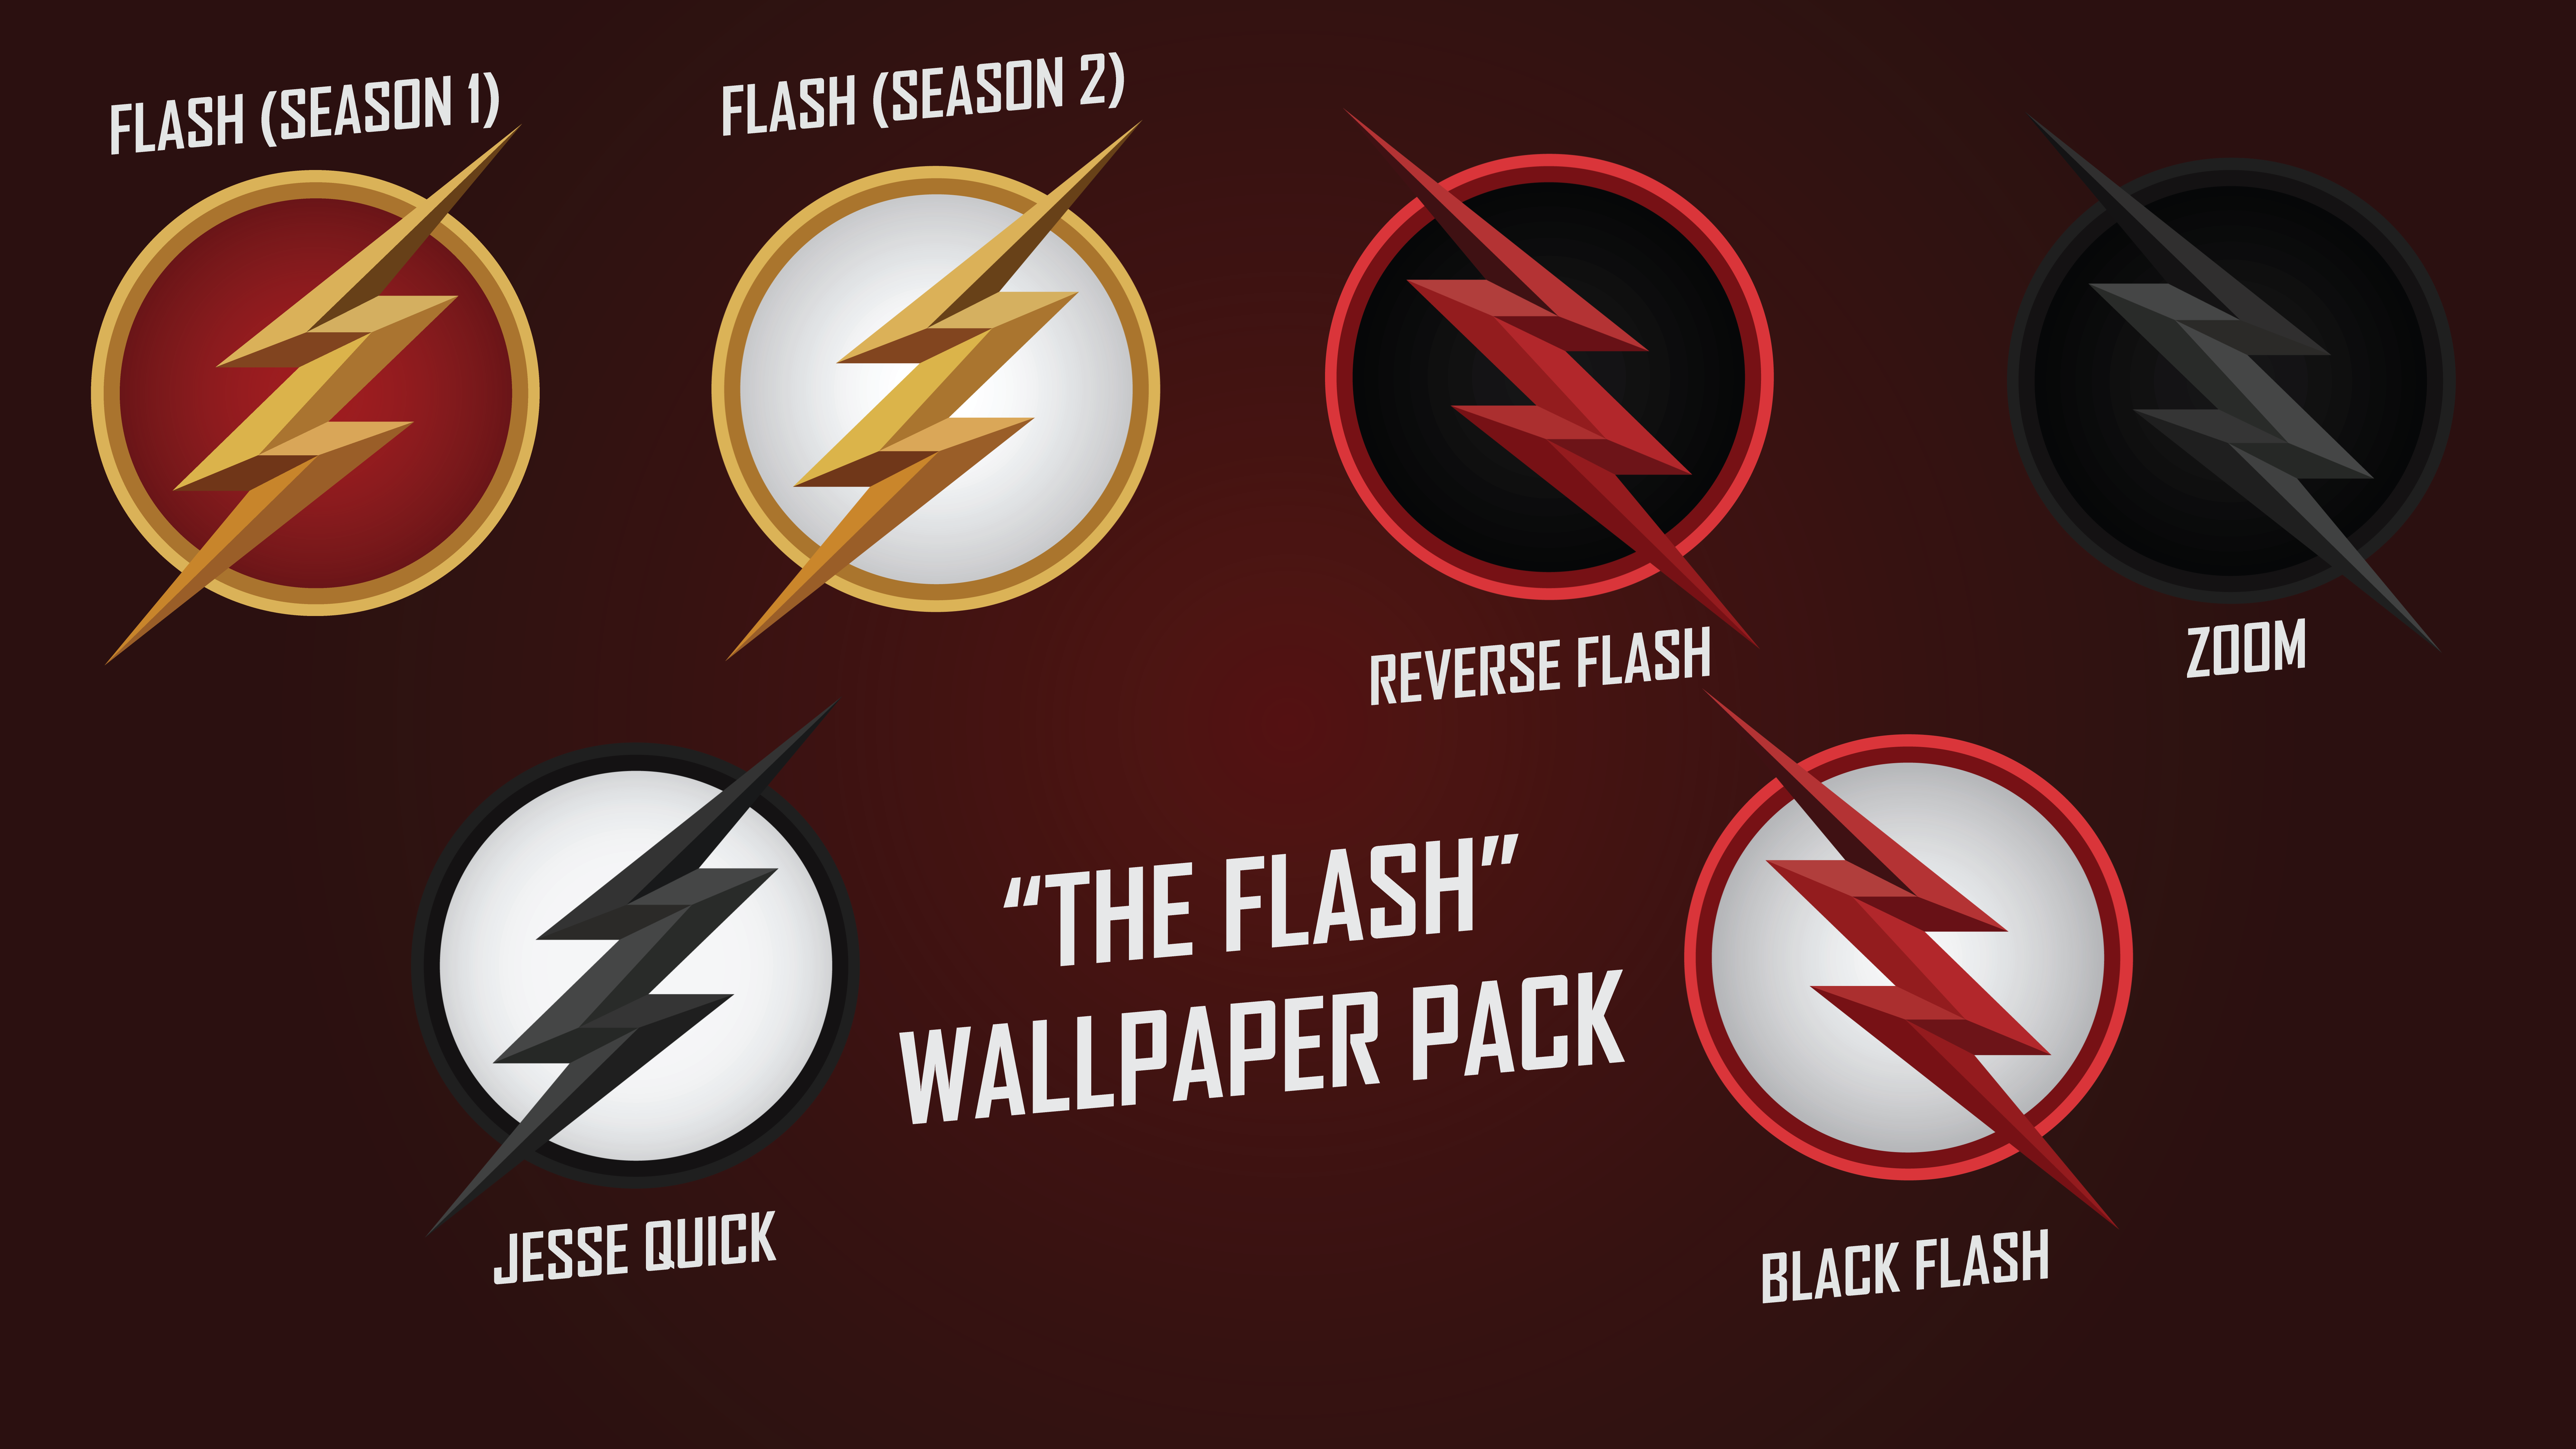 The Flash Cw Wallpaper Pack By Godsnotdead88123